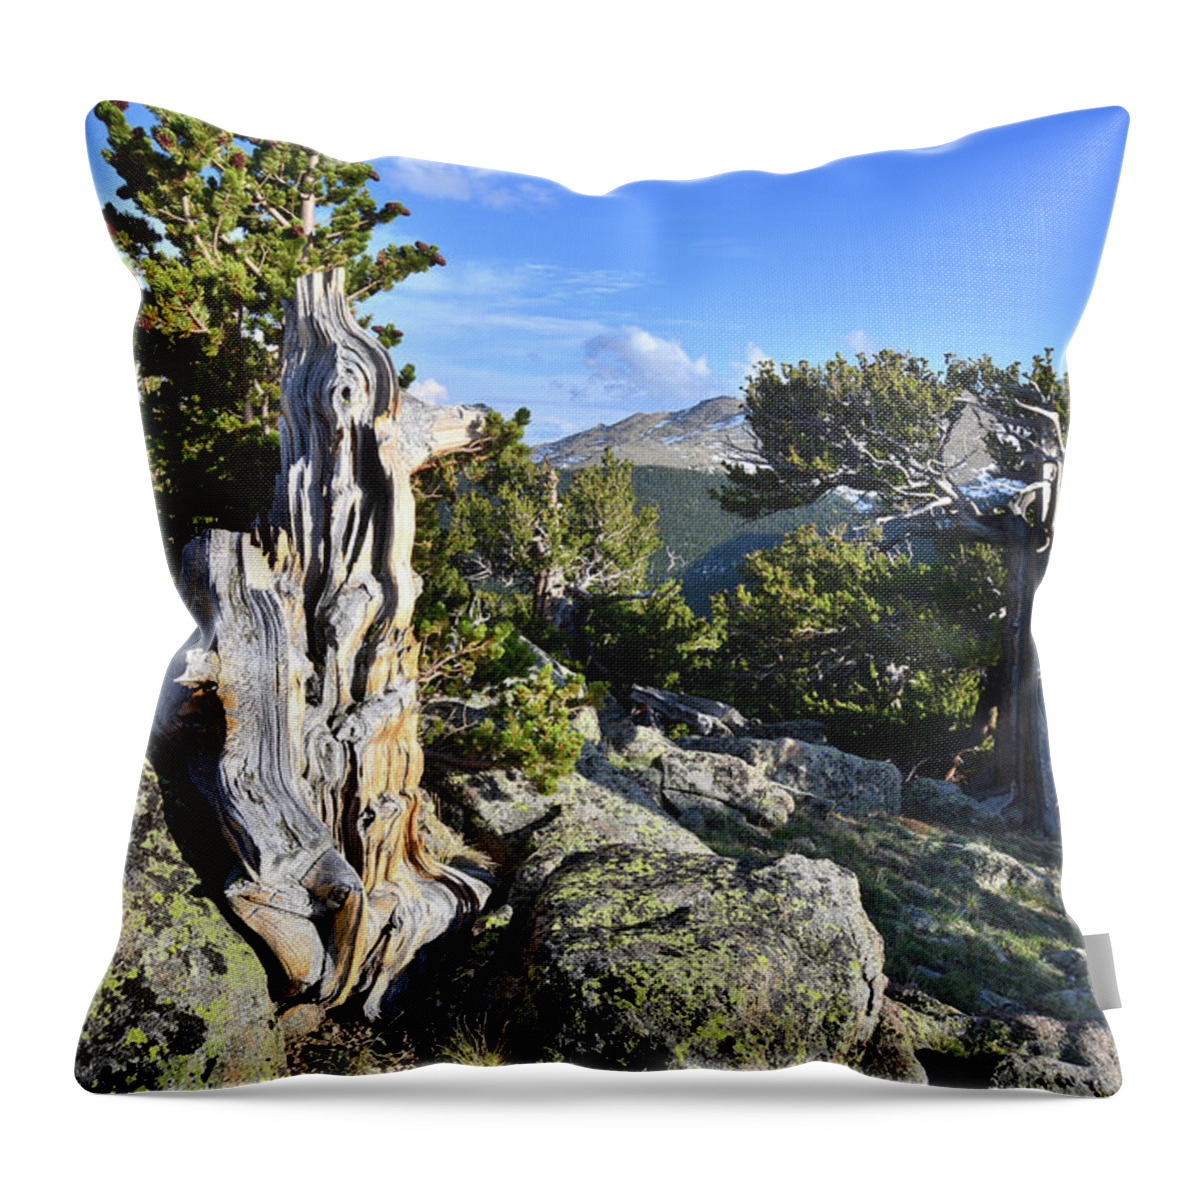 Mount Goliath Natural Area Throw Pillow featuring the photograph Mt. Evans Bristlecones by Ray Mathis